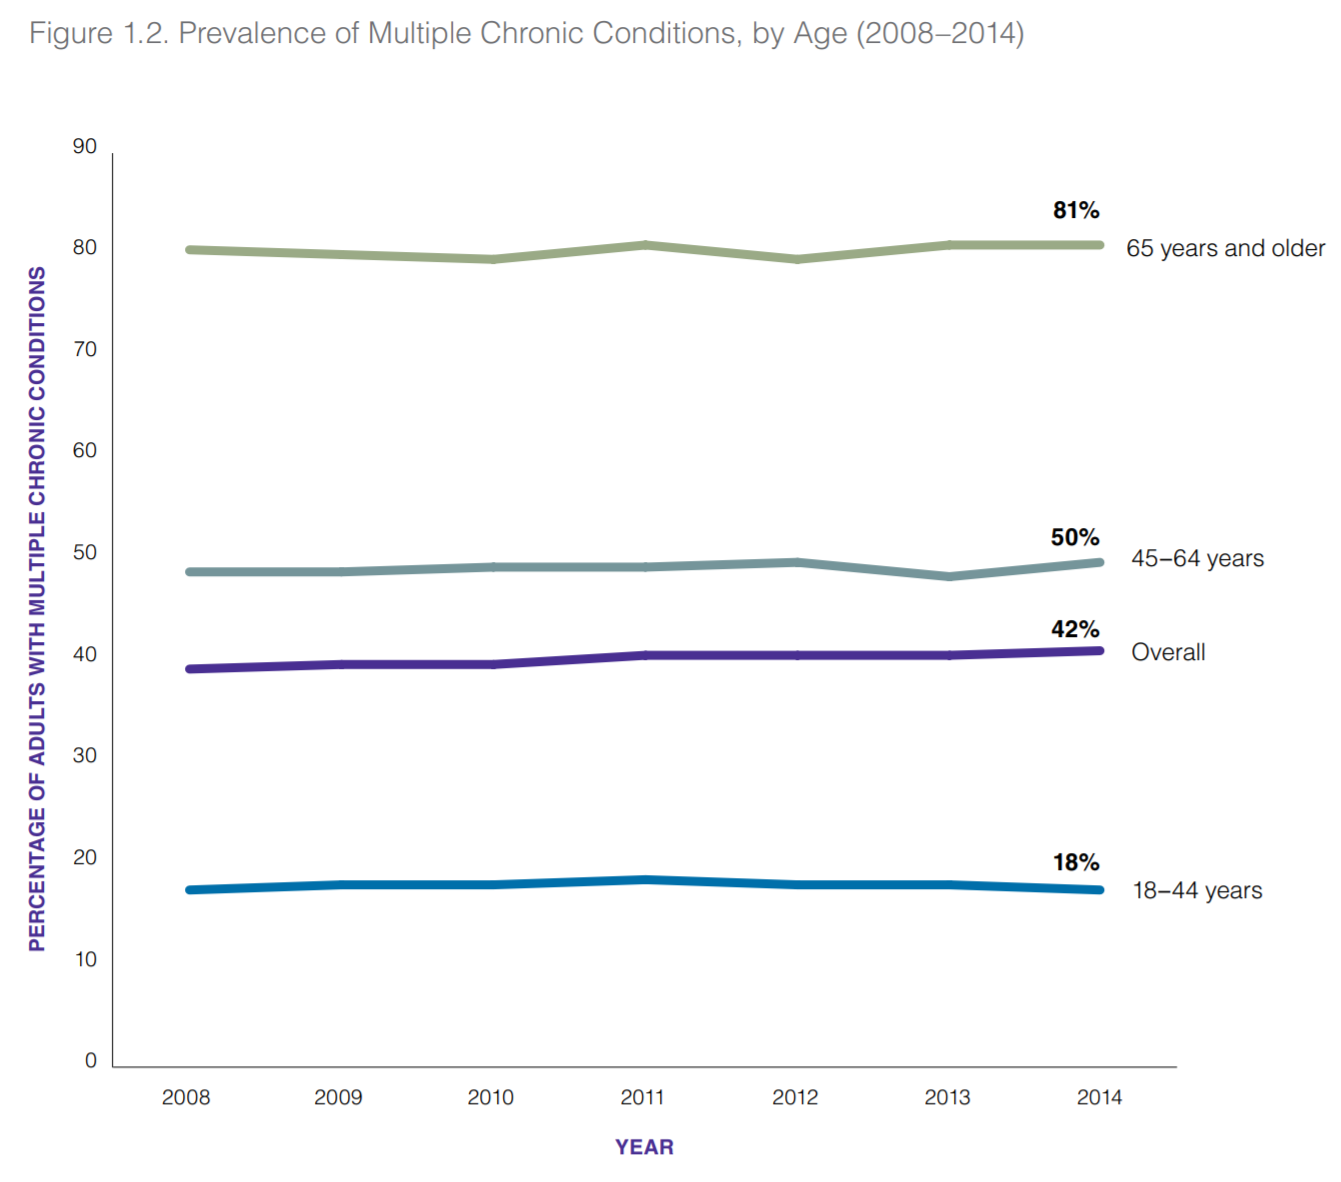 Prevalence of Multiple Chronic Conditions by Age (2008-2014)